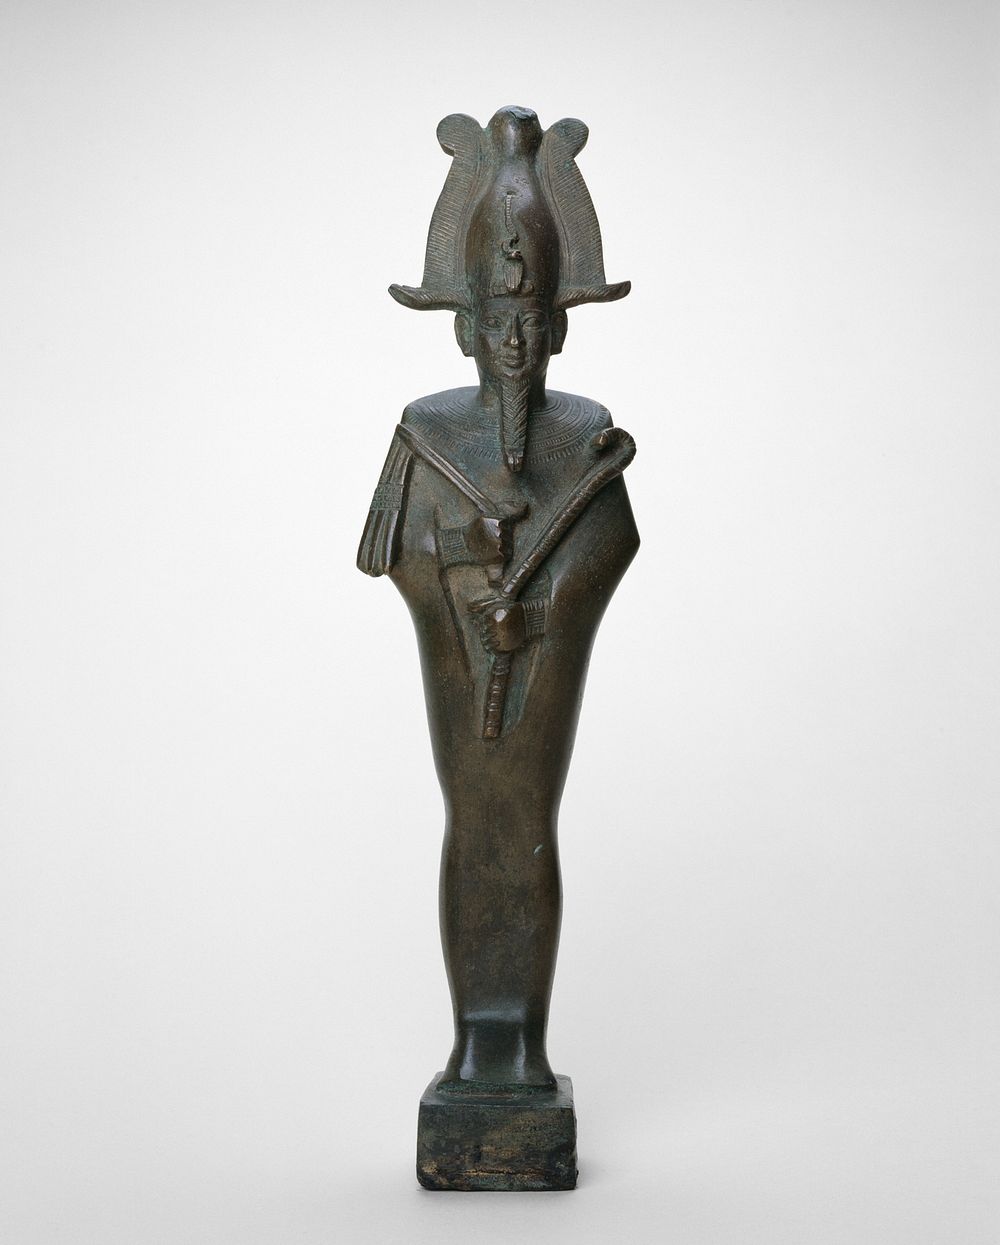 Statuette of Osiris by Ancient Egyptian